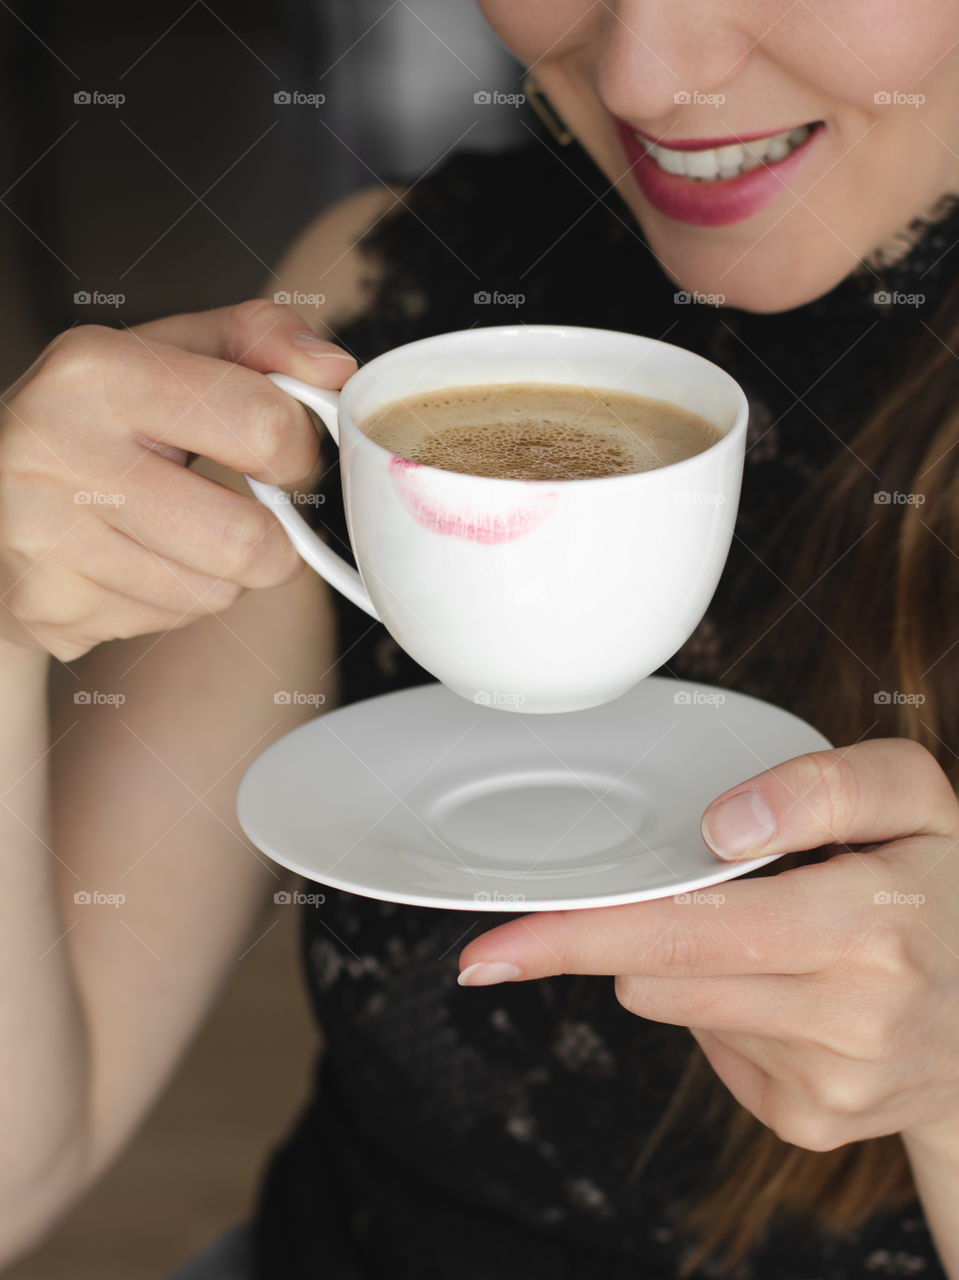 Lipstick on the white coffee cup